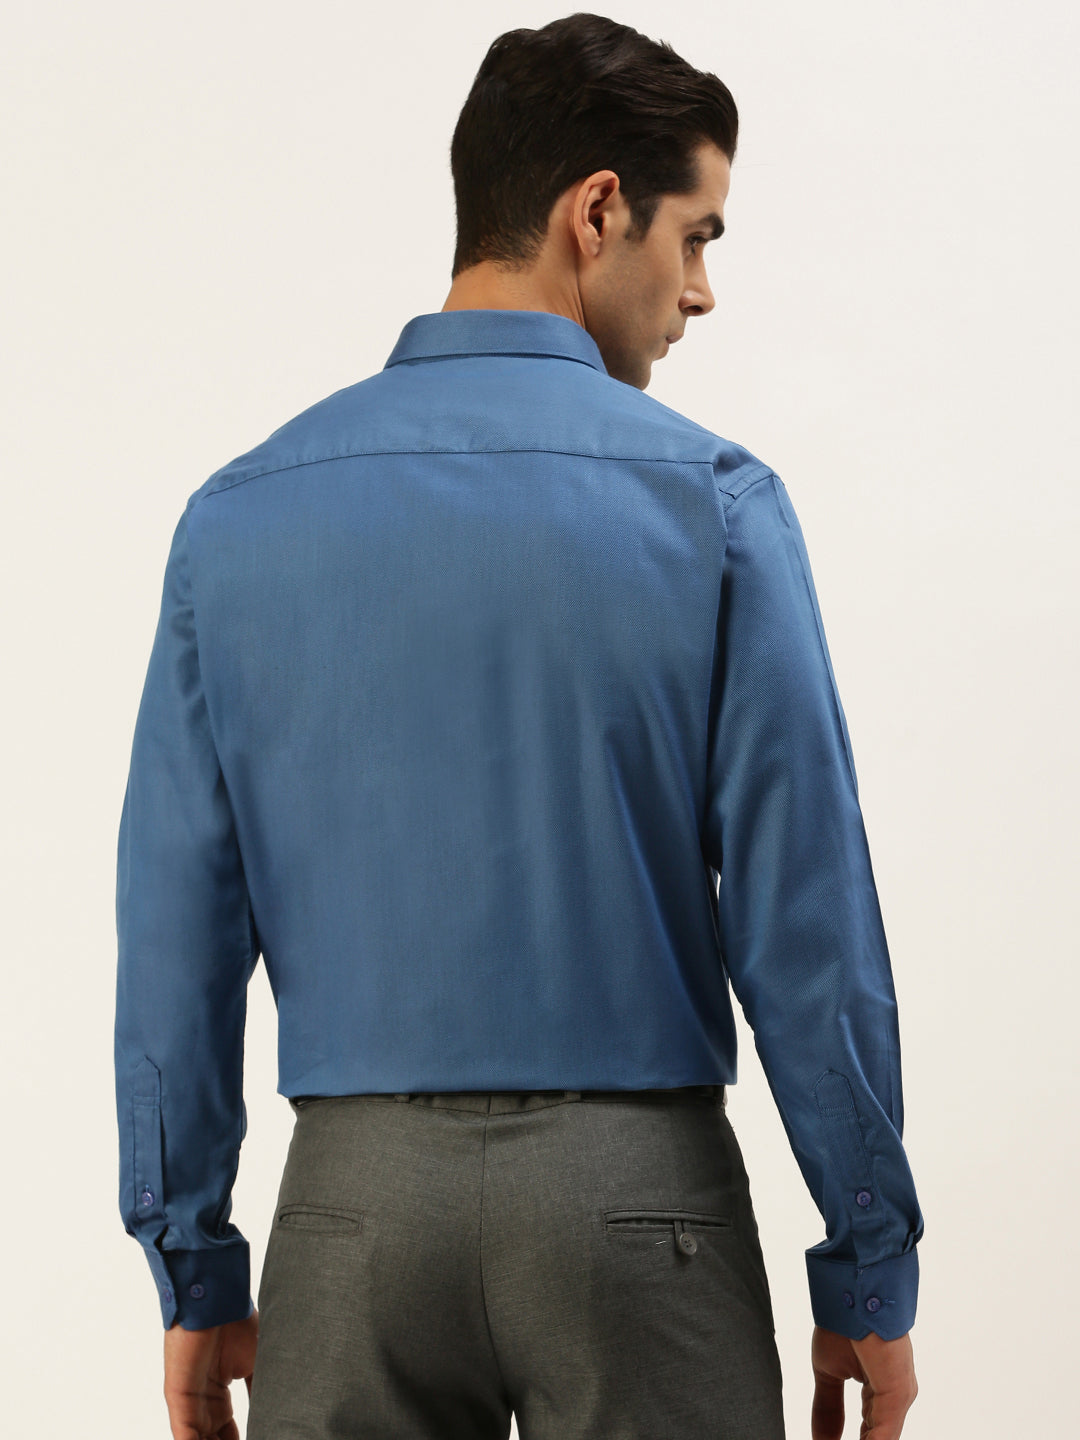 Mens Cotton Formal Shirt Full Sleeves Blue TF7-Back view